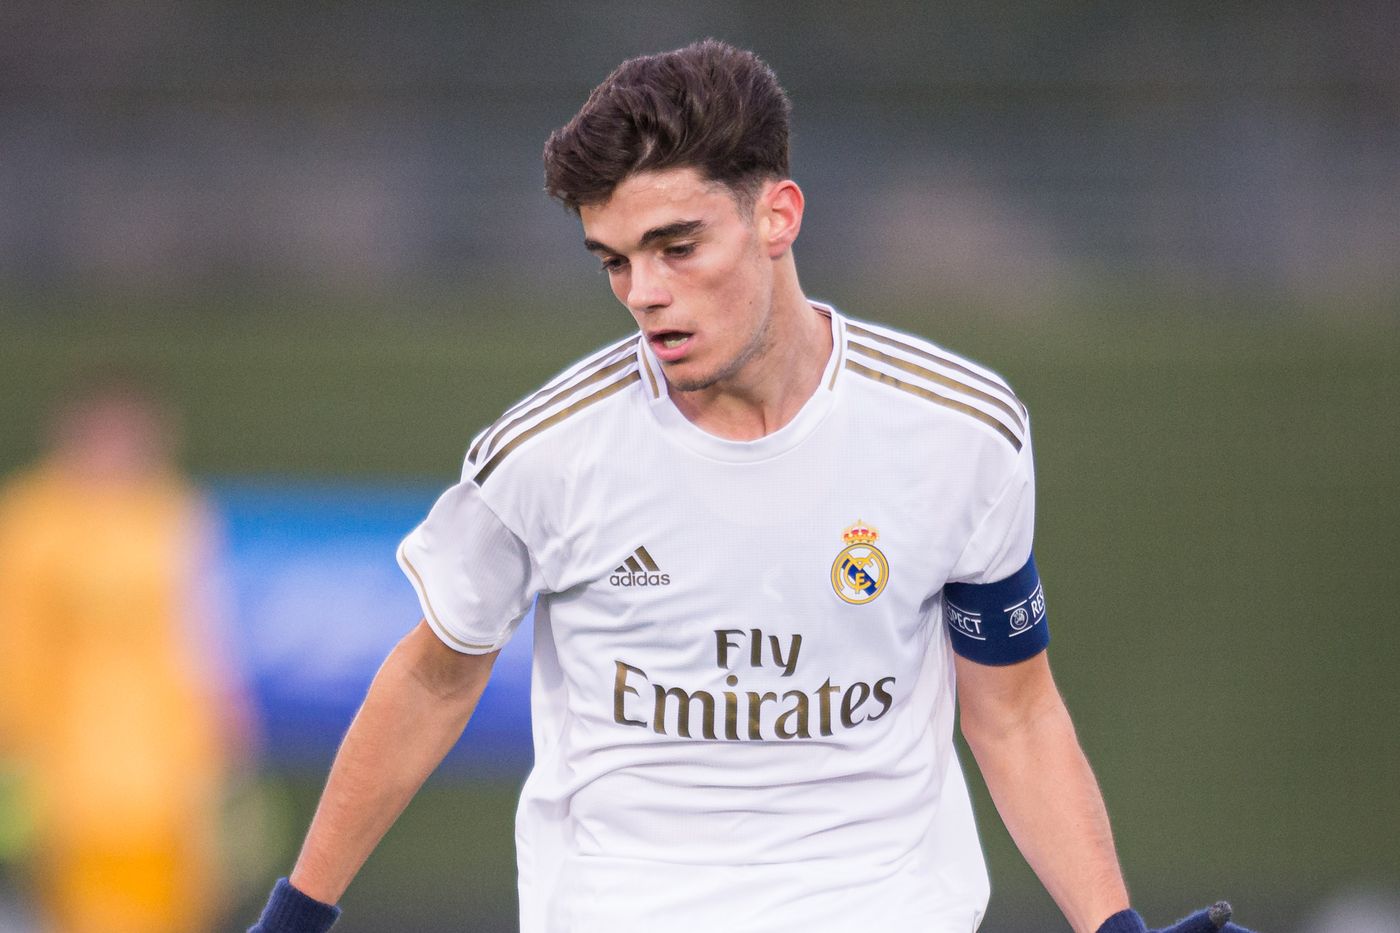 Miguel Gutierrez is a Real Madrid youth academy product